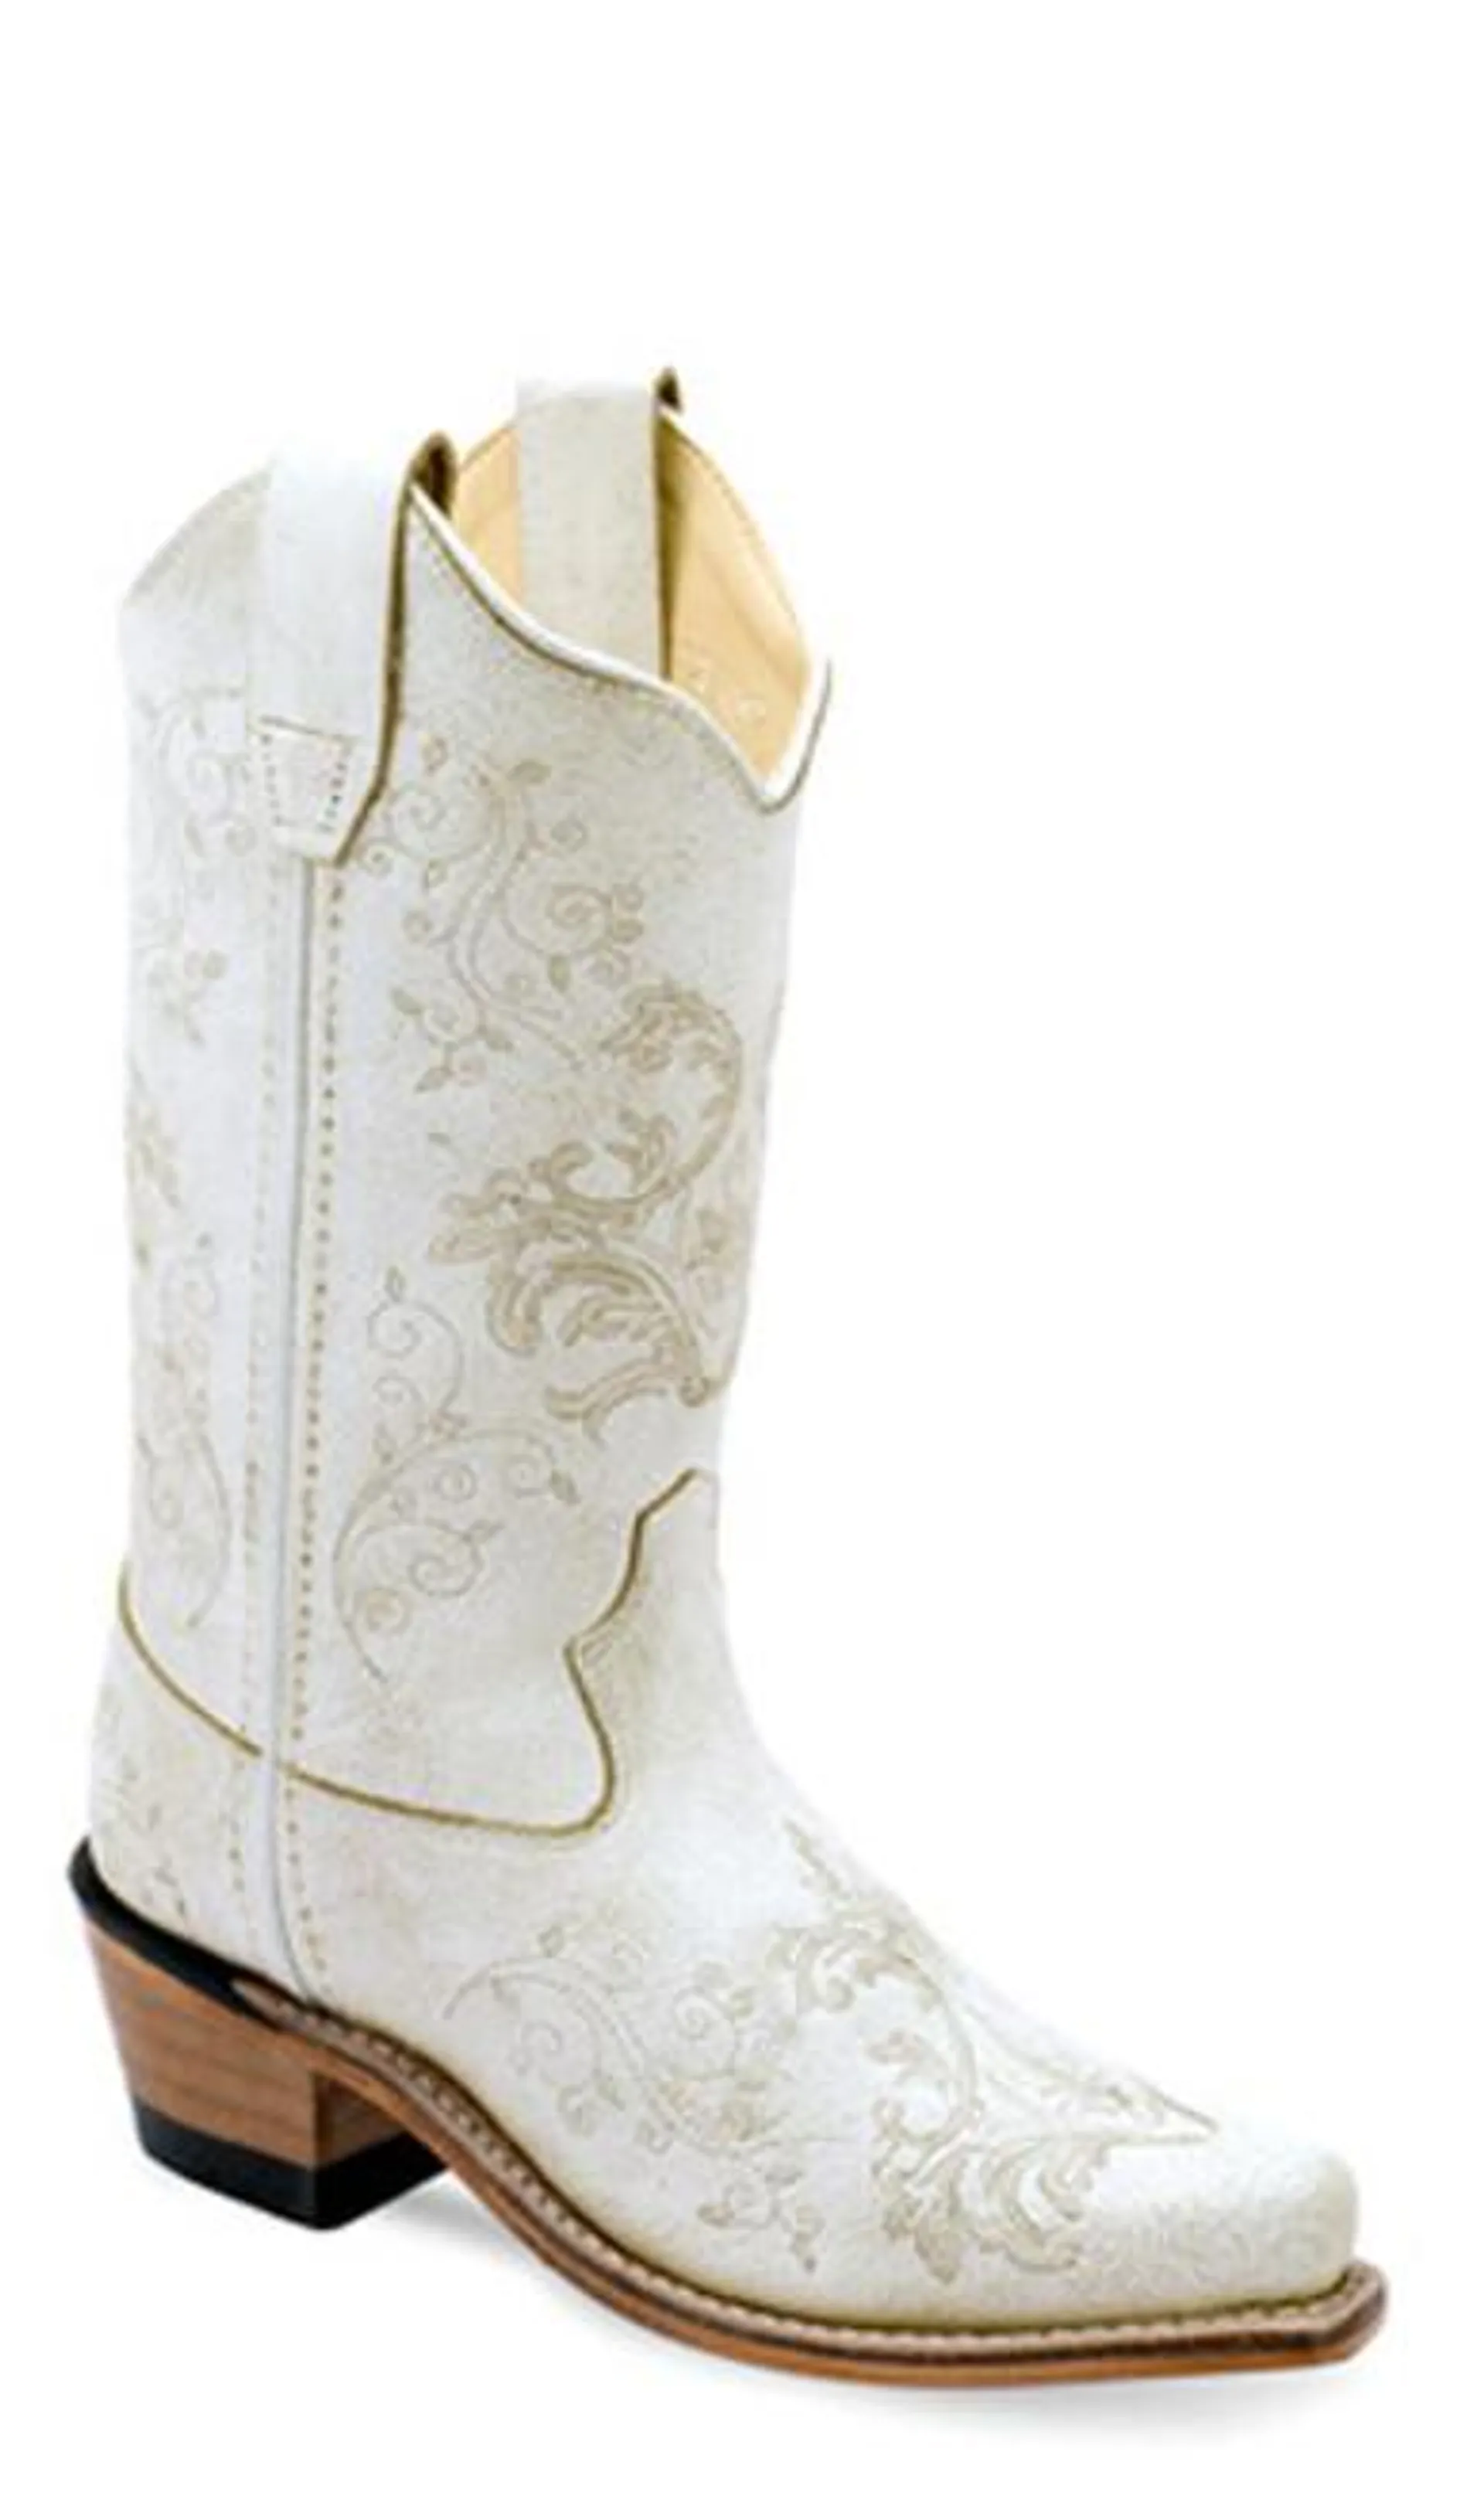 Jama Boots Girl's Fashion Snip Toe 8" White Leather Boots with Gold Floral Design